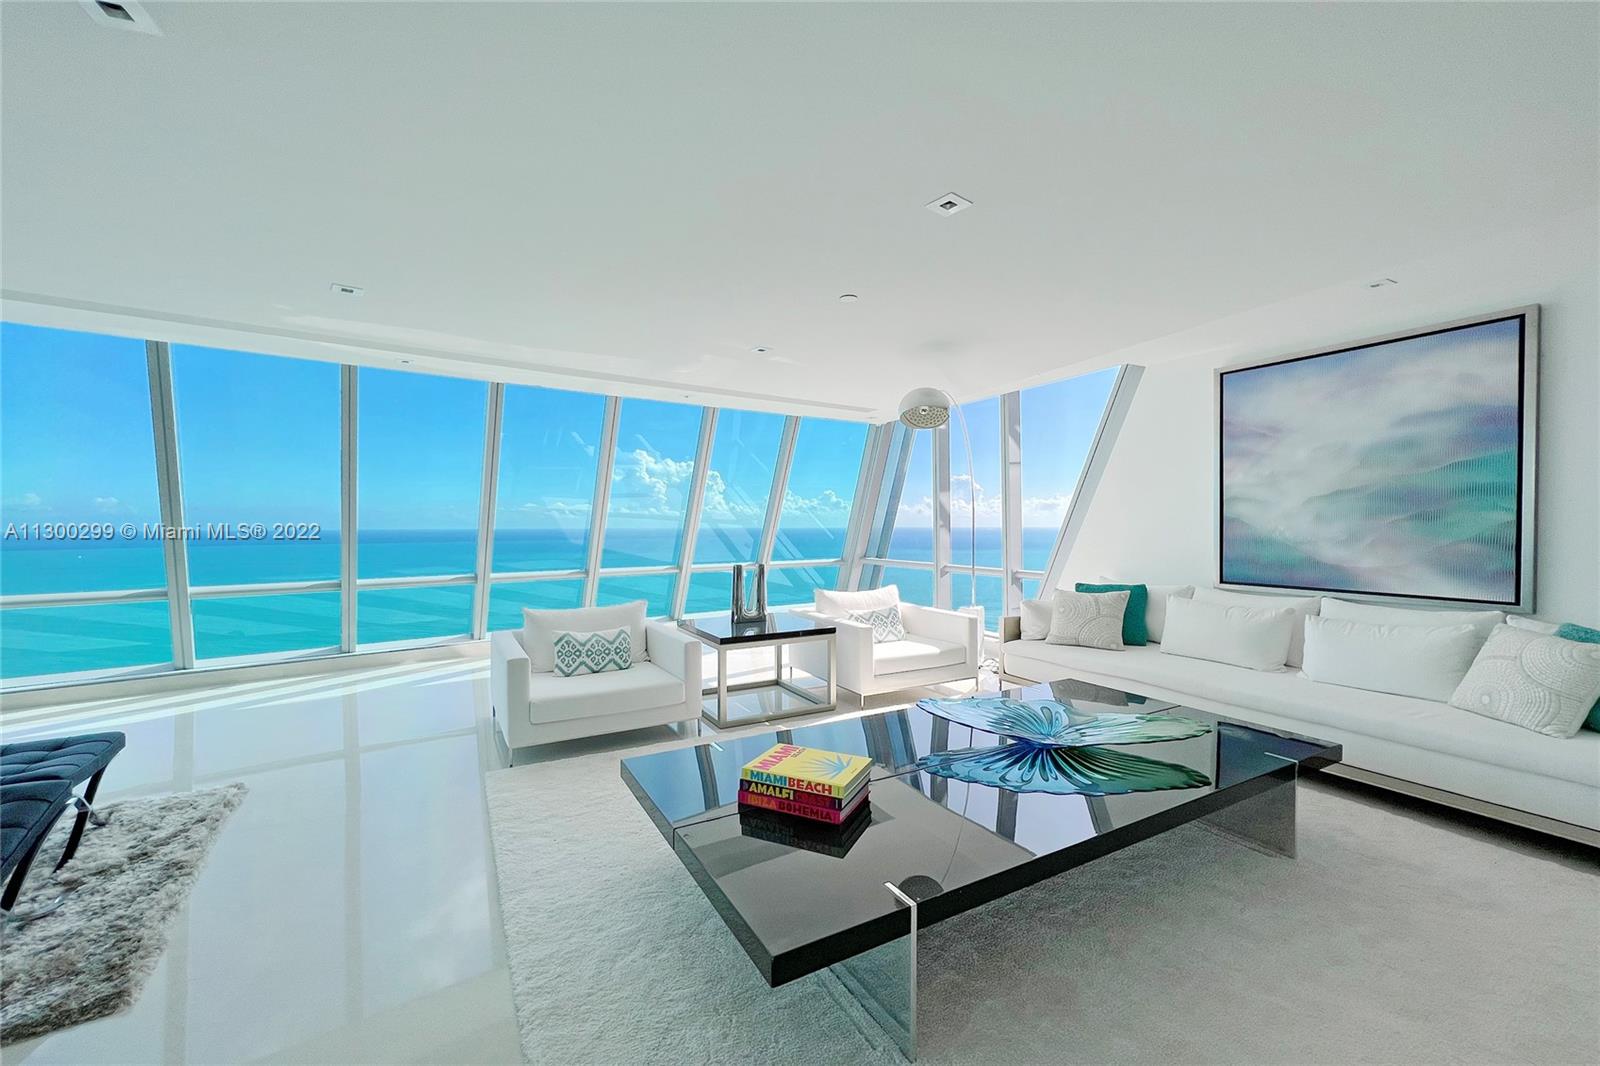 Jade Ocean PH 4803 is the ultimate home in the sky with breathtaking 360-degree views of the ocean, downtown Miami and the inter coastal. This home features 8,332 SF living space, 5 bedrooms, 6/1 bathrooms, and a media room. Spectacular outdoor living at its finest offering appr. 2,000 SF of terraces and a spa. Each bedroom has a private terrace and en-suite. This exceptionally  priced PH is being sold furnished. Jade Ocean amenities include 2 pools, beach service, children's playroom, business center, spa, fitness center, concierge, valet, and doorman. SEE BROKER REMARKS